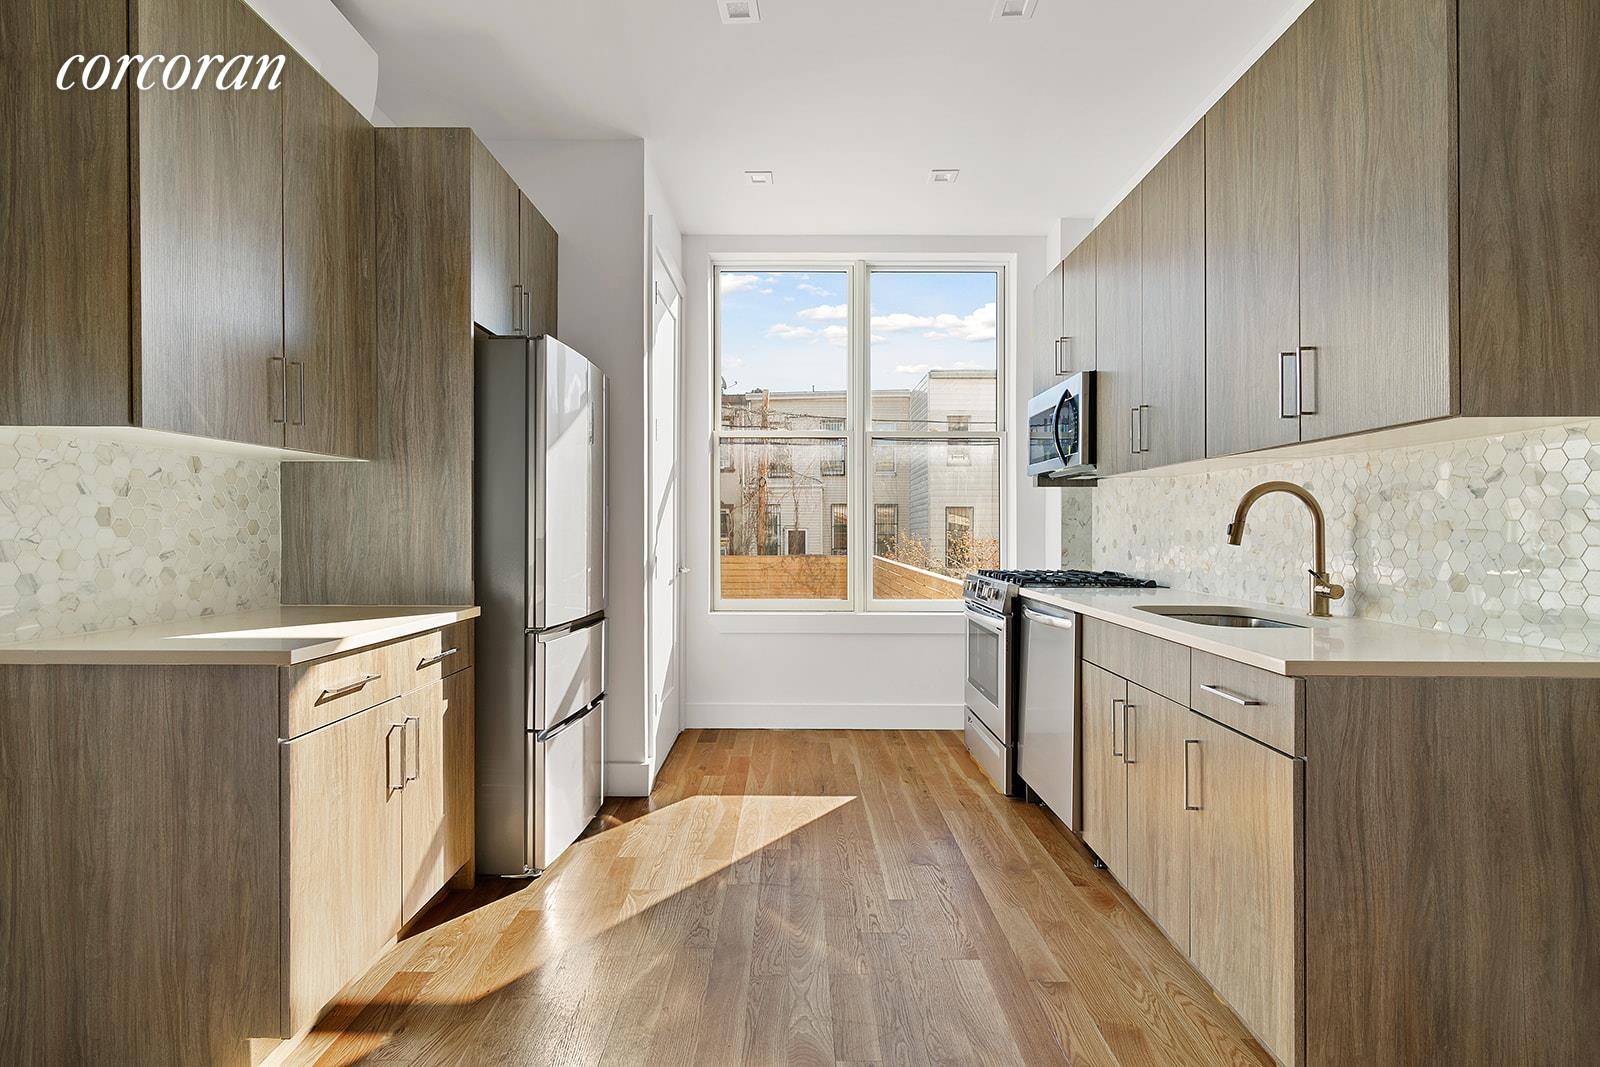 Welcome to 900 Willoughby Ave, a 7 unit boutique condo conversion located in the heart of prime Bushwick, offering a mix of studio and one and two bedroom layouts.